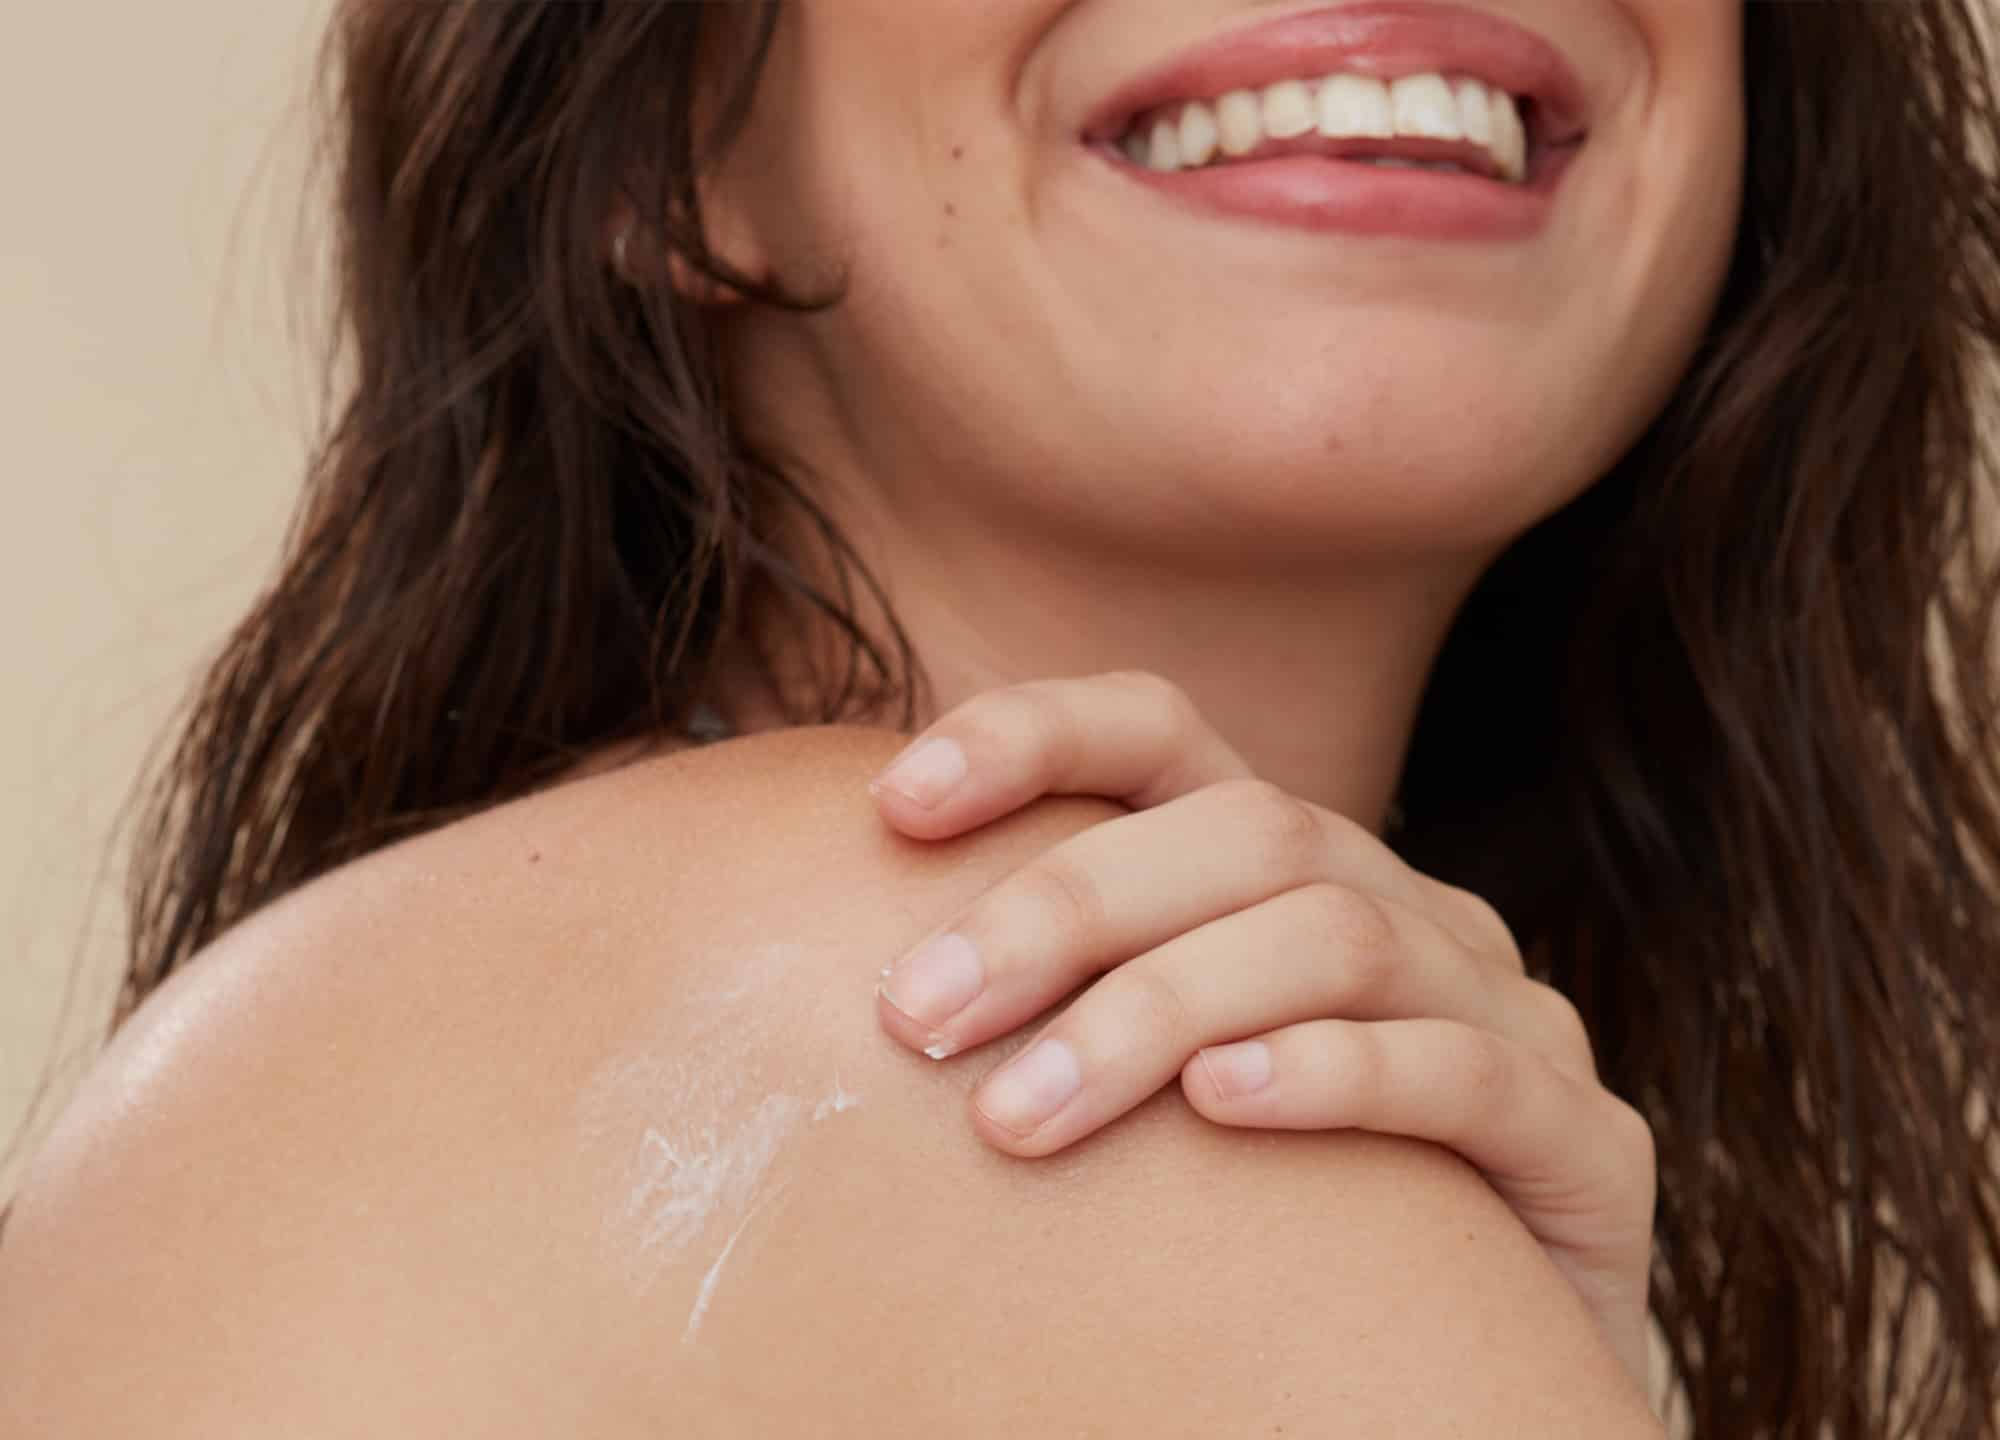 From things that help soothe sensitive skin to those that may be harmful hormone disruptors, there are the sunscreen ingredients you need to know about.